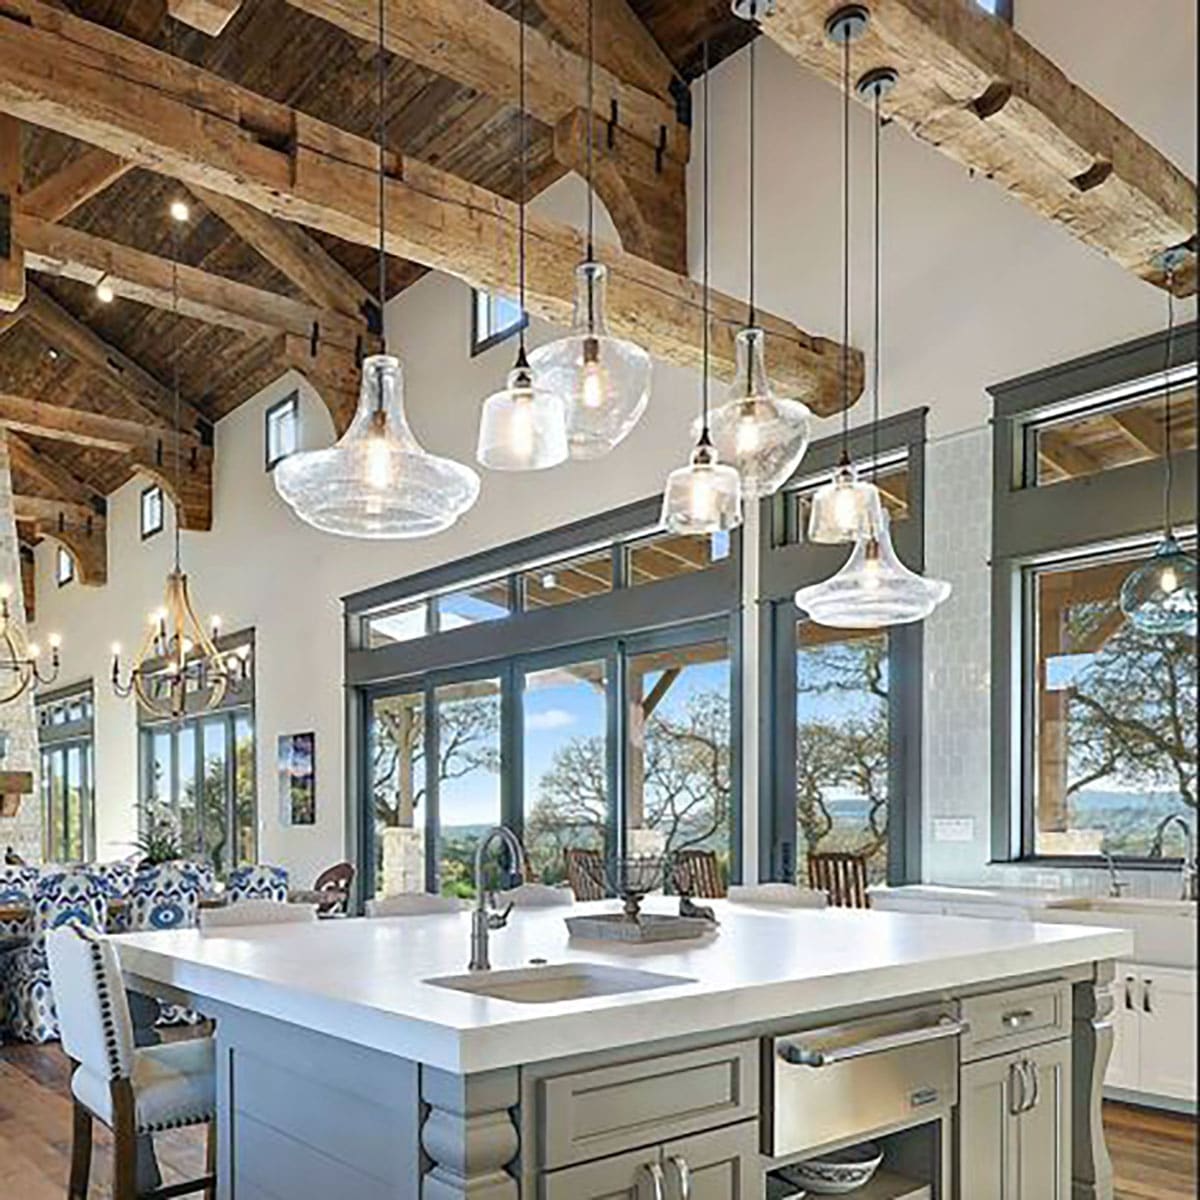 Exposed Ceiling Kitchens